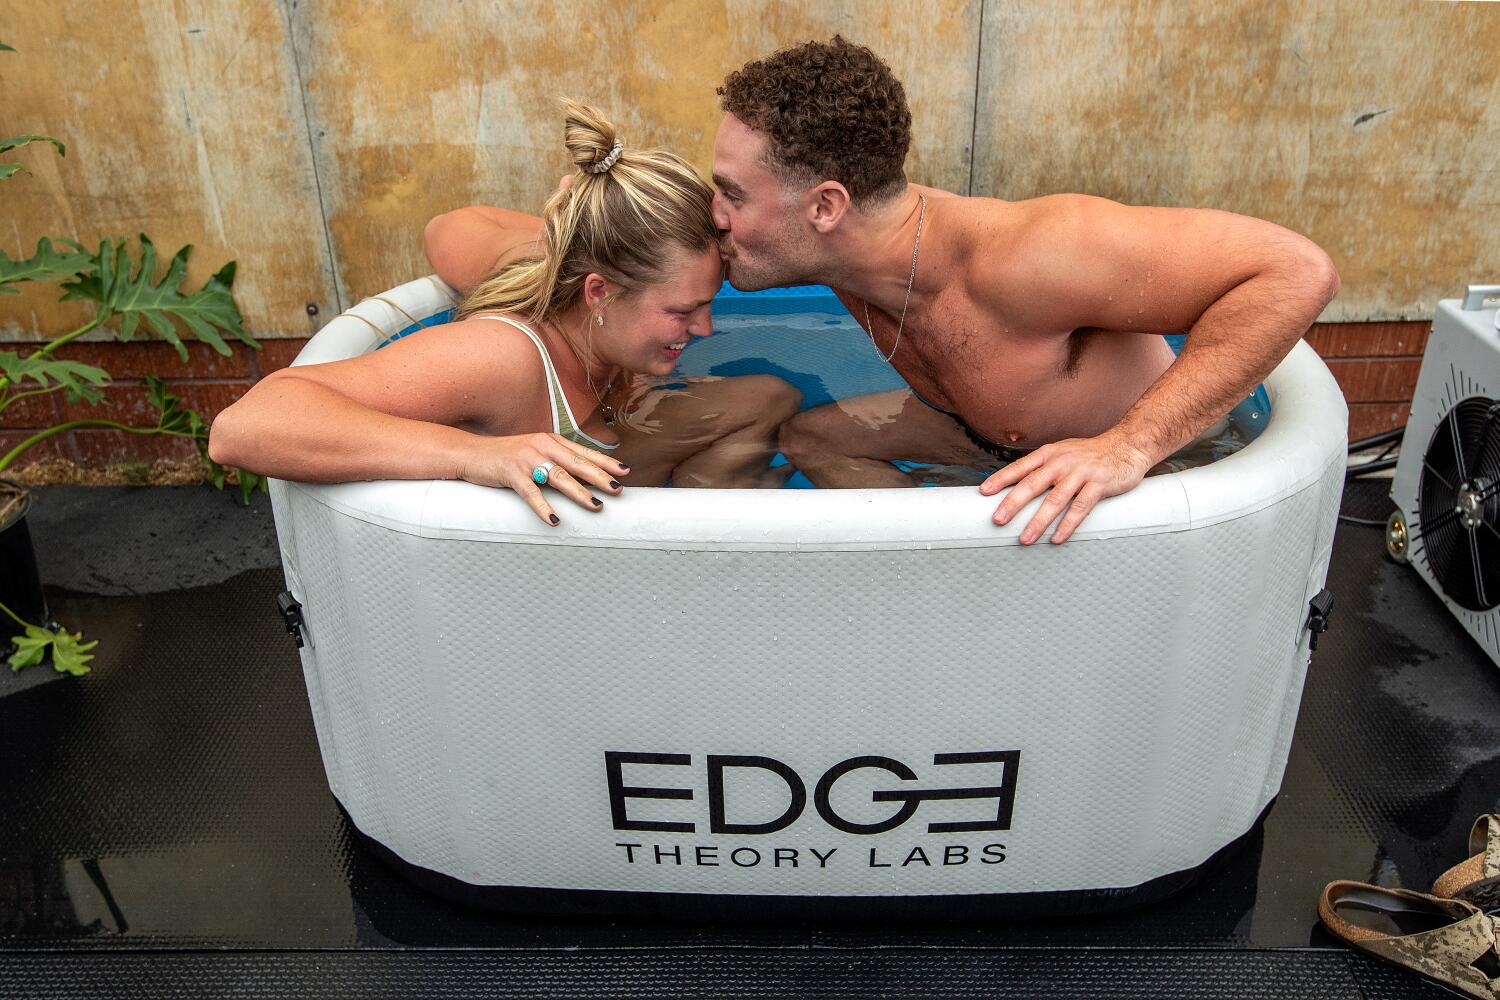 They pick up dates in freezing ice baths — and prefer it to flirting in bars